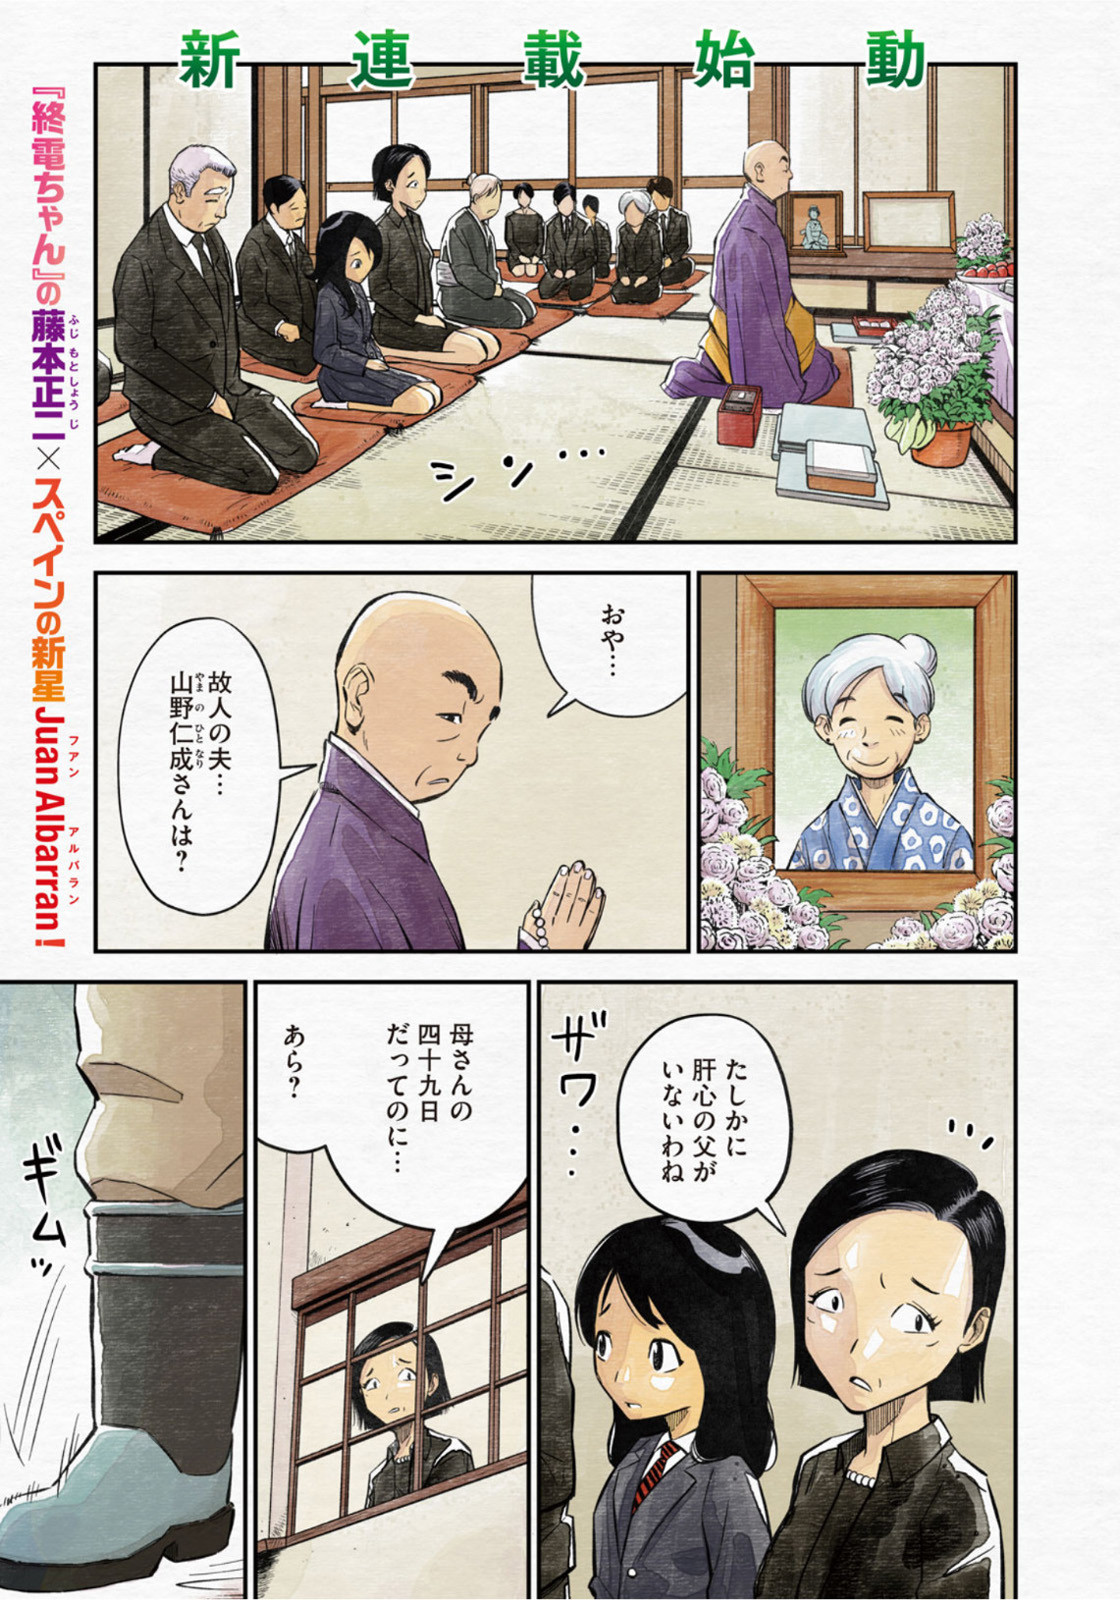 Weekly Morning - 週刊モーニング - Chapter 2022-24 - Page 3